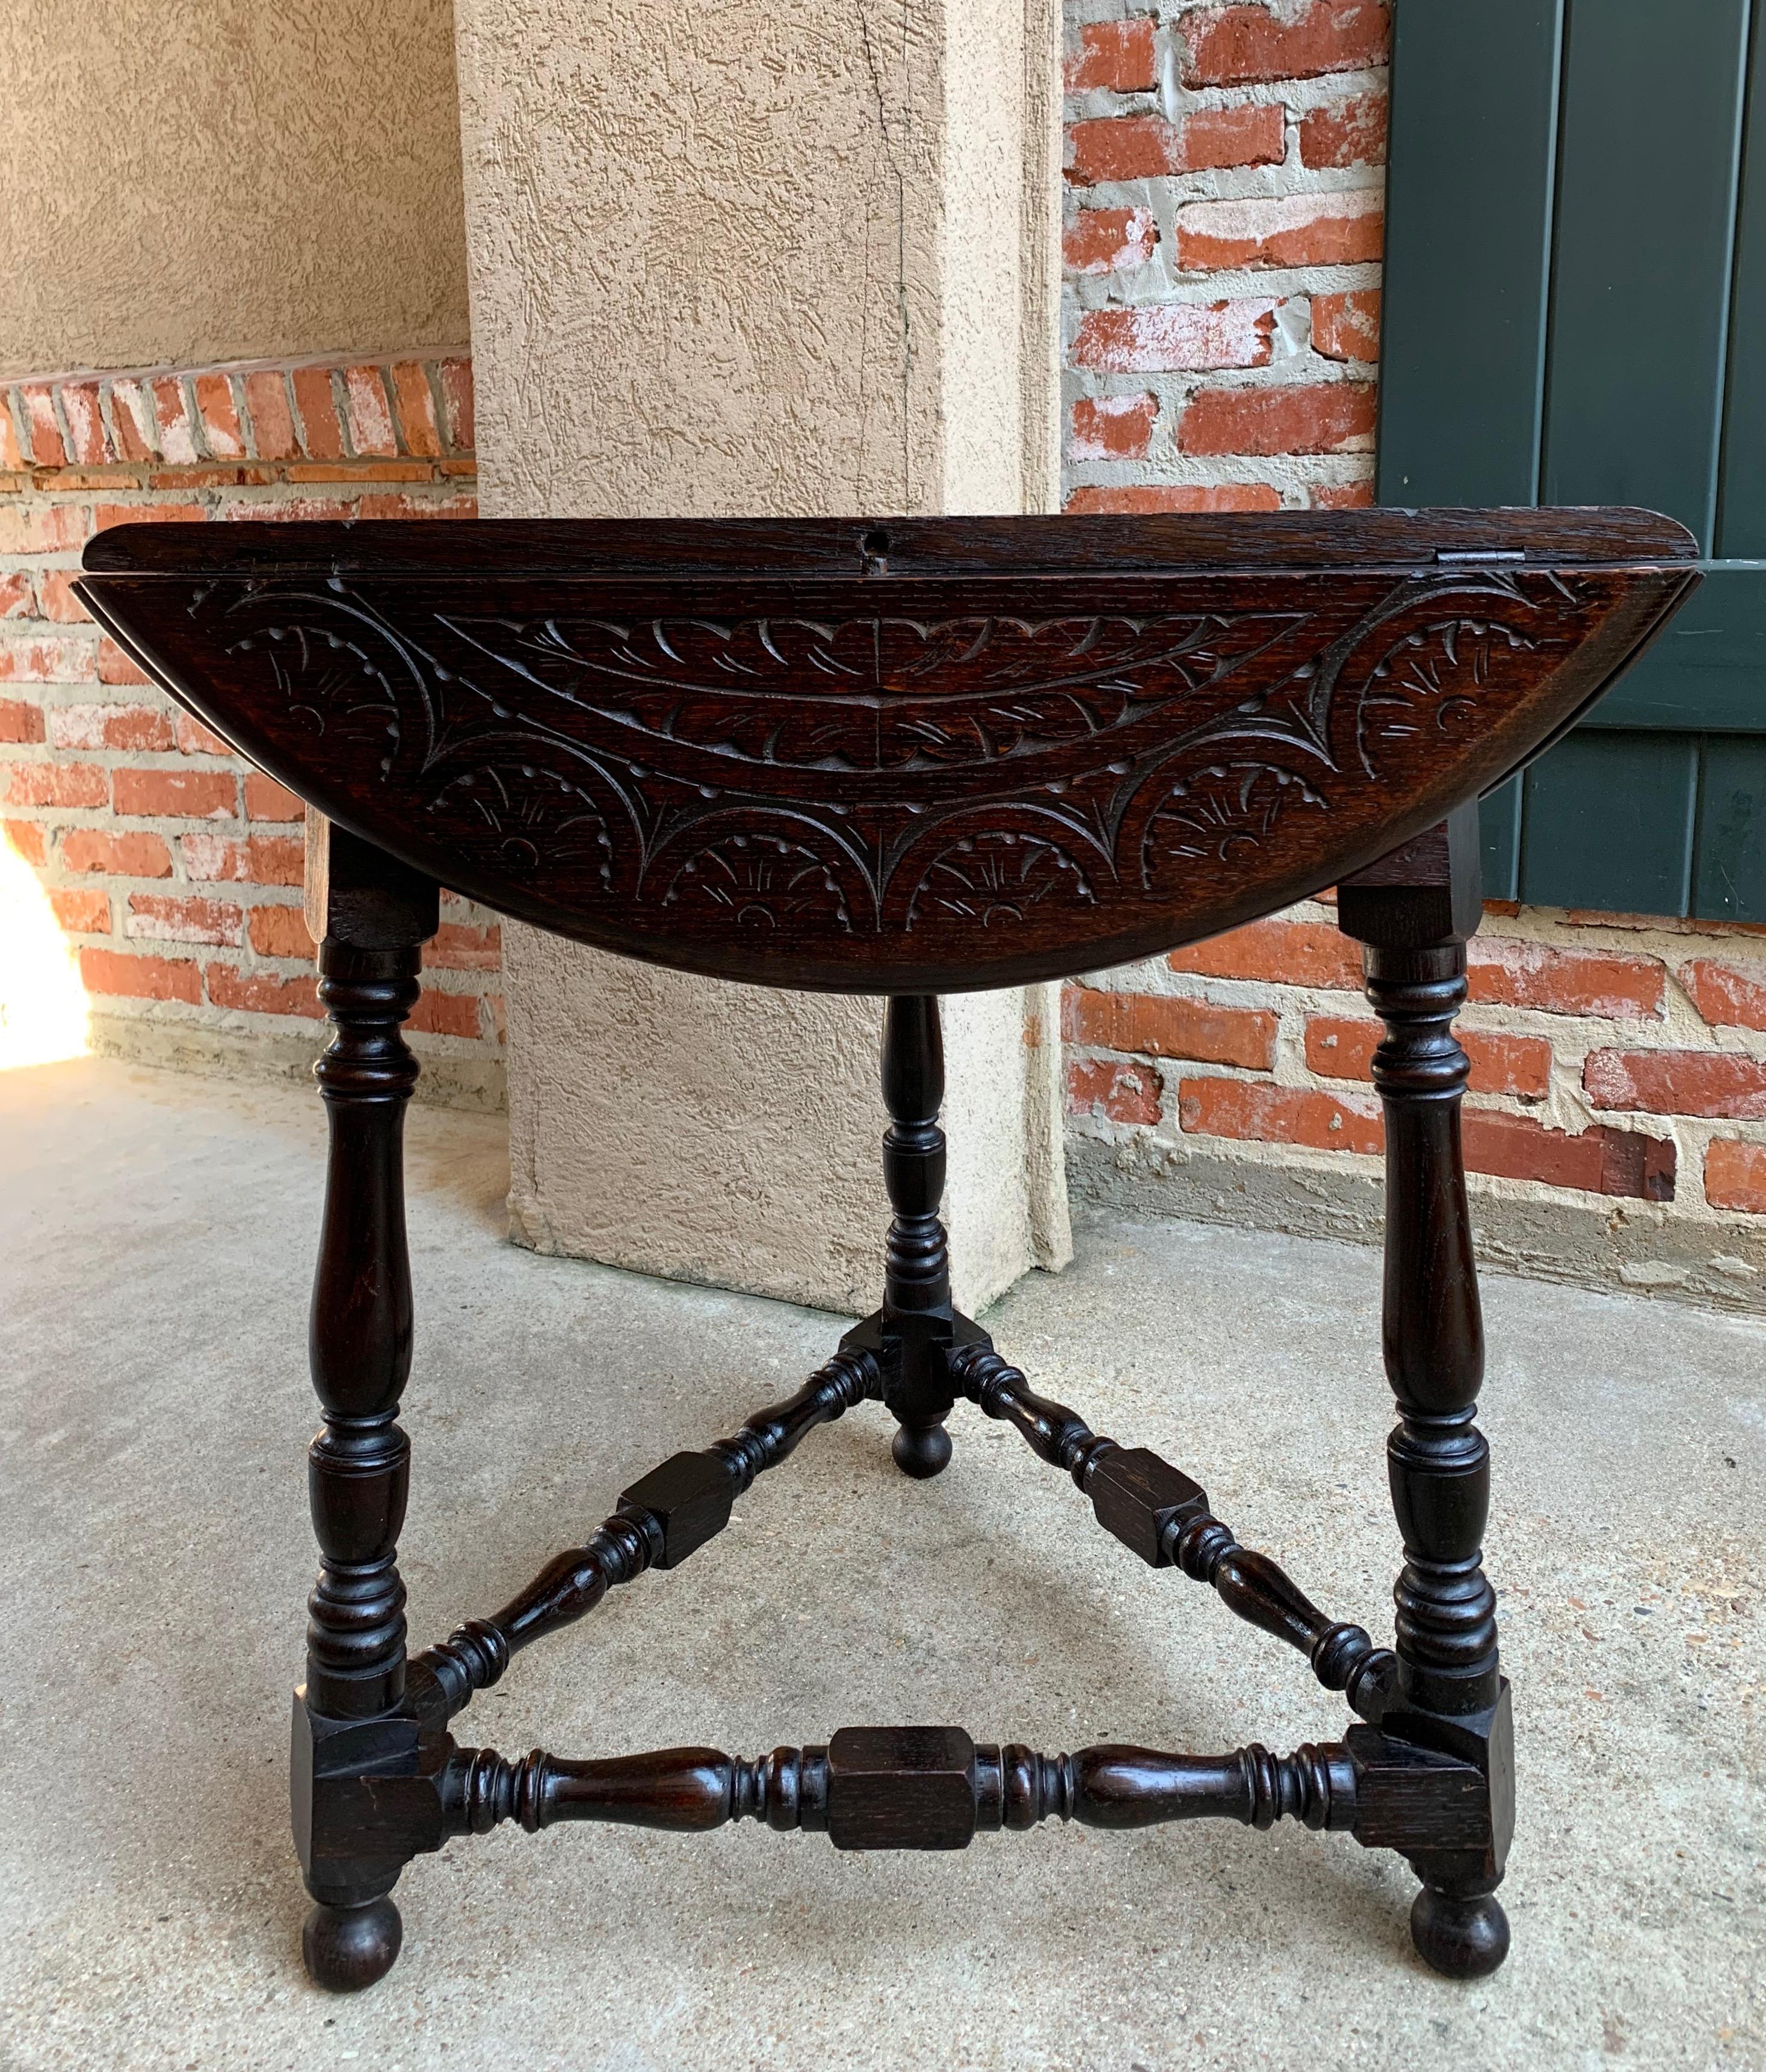 Direct from England, a charming antique English carved oak “handkerchief” table, with leaves down it can be tucked in any small place or corner. Turn the top slightly and all three leaves open up to make a lovely round table top!~
~Fully carved on